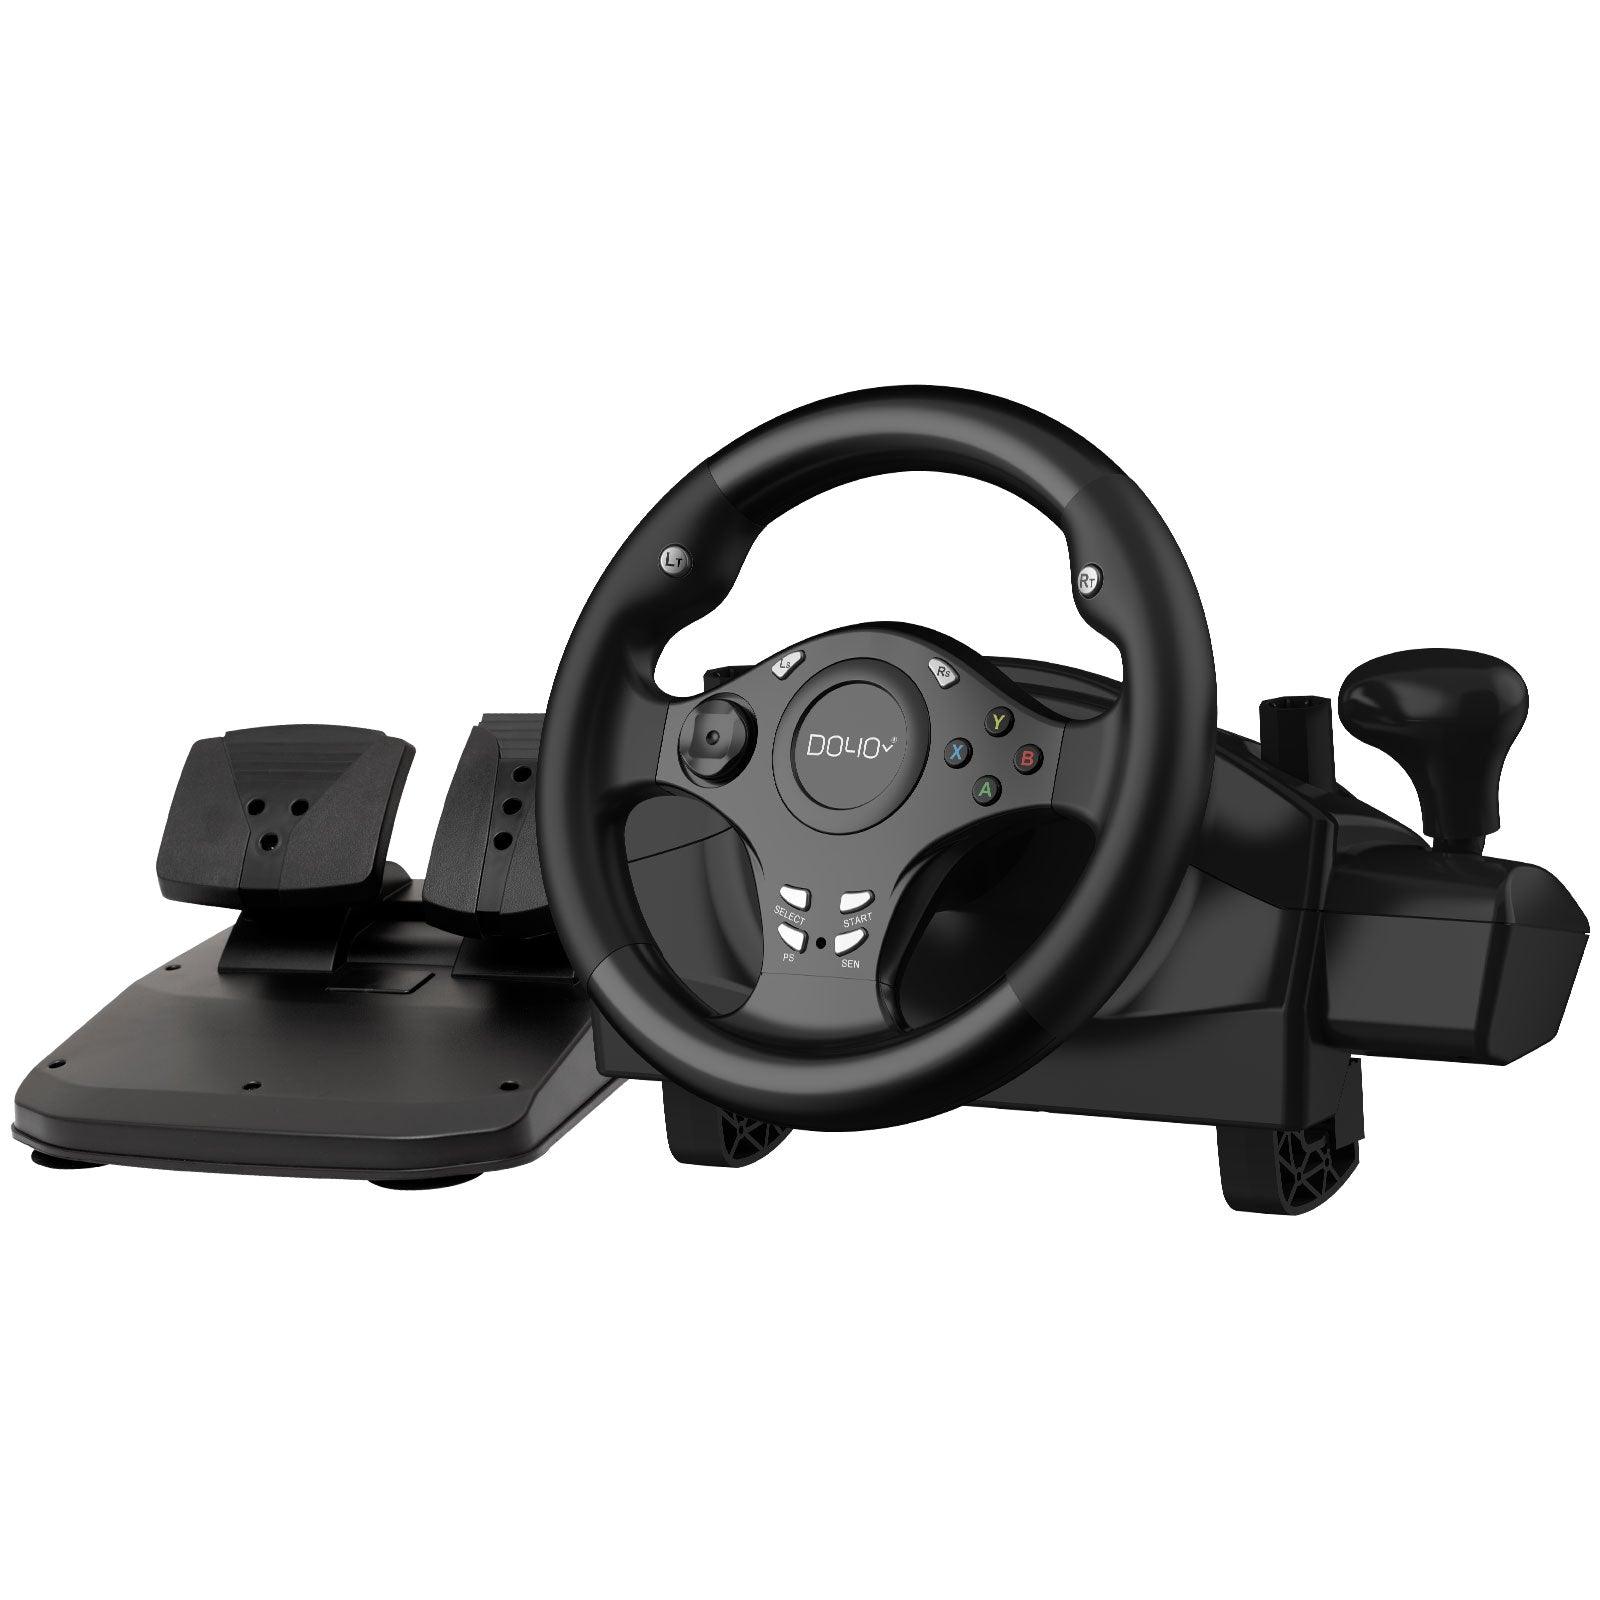  NBCP Racing Wheel, Gaming Steering Wheels 1080° Driving Sim Car  Simulator with Pedals Clutch Paddle Gear Shifters for Xbox One/Xbox Series  X S/ PS4/ PS3/ PC/Xinput/Xbox 360/ Switch/Android : Video Games